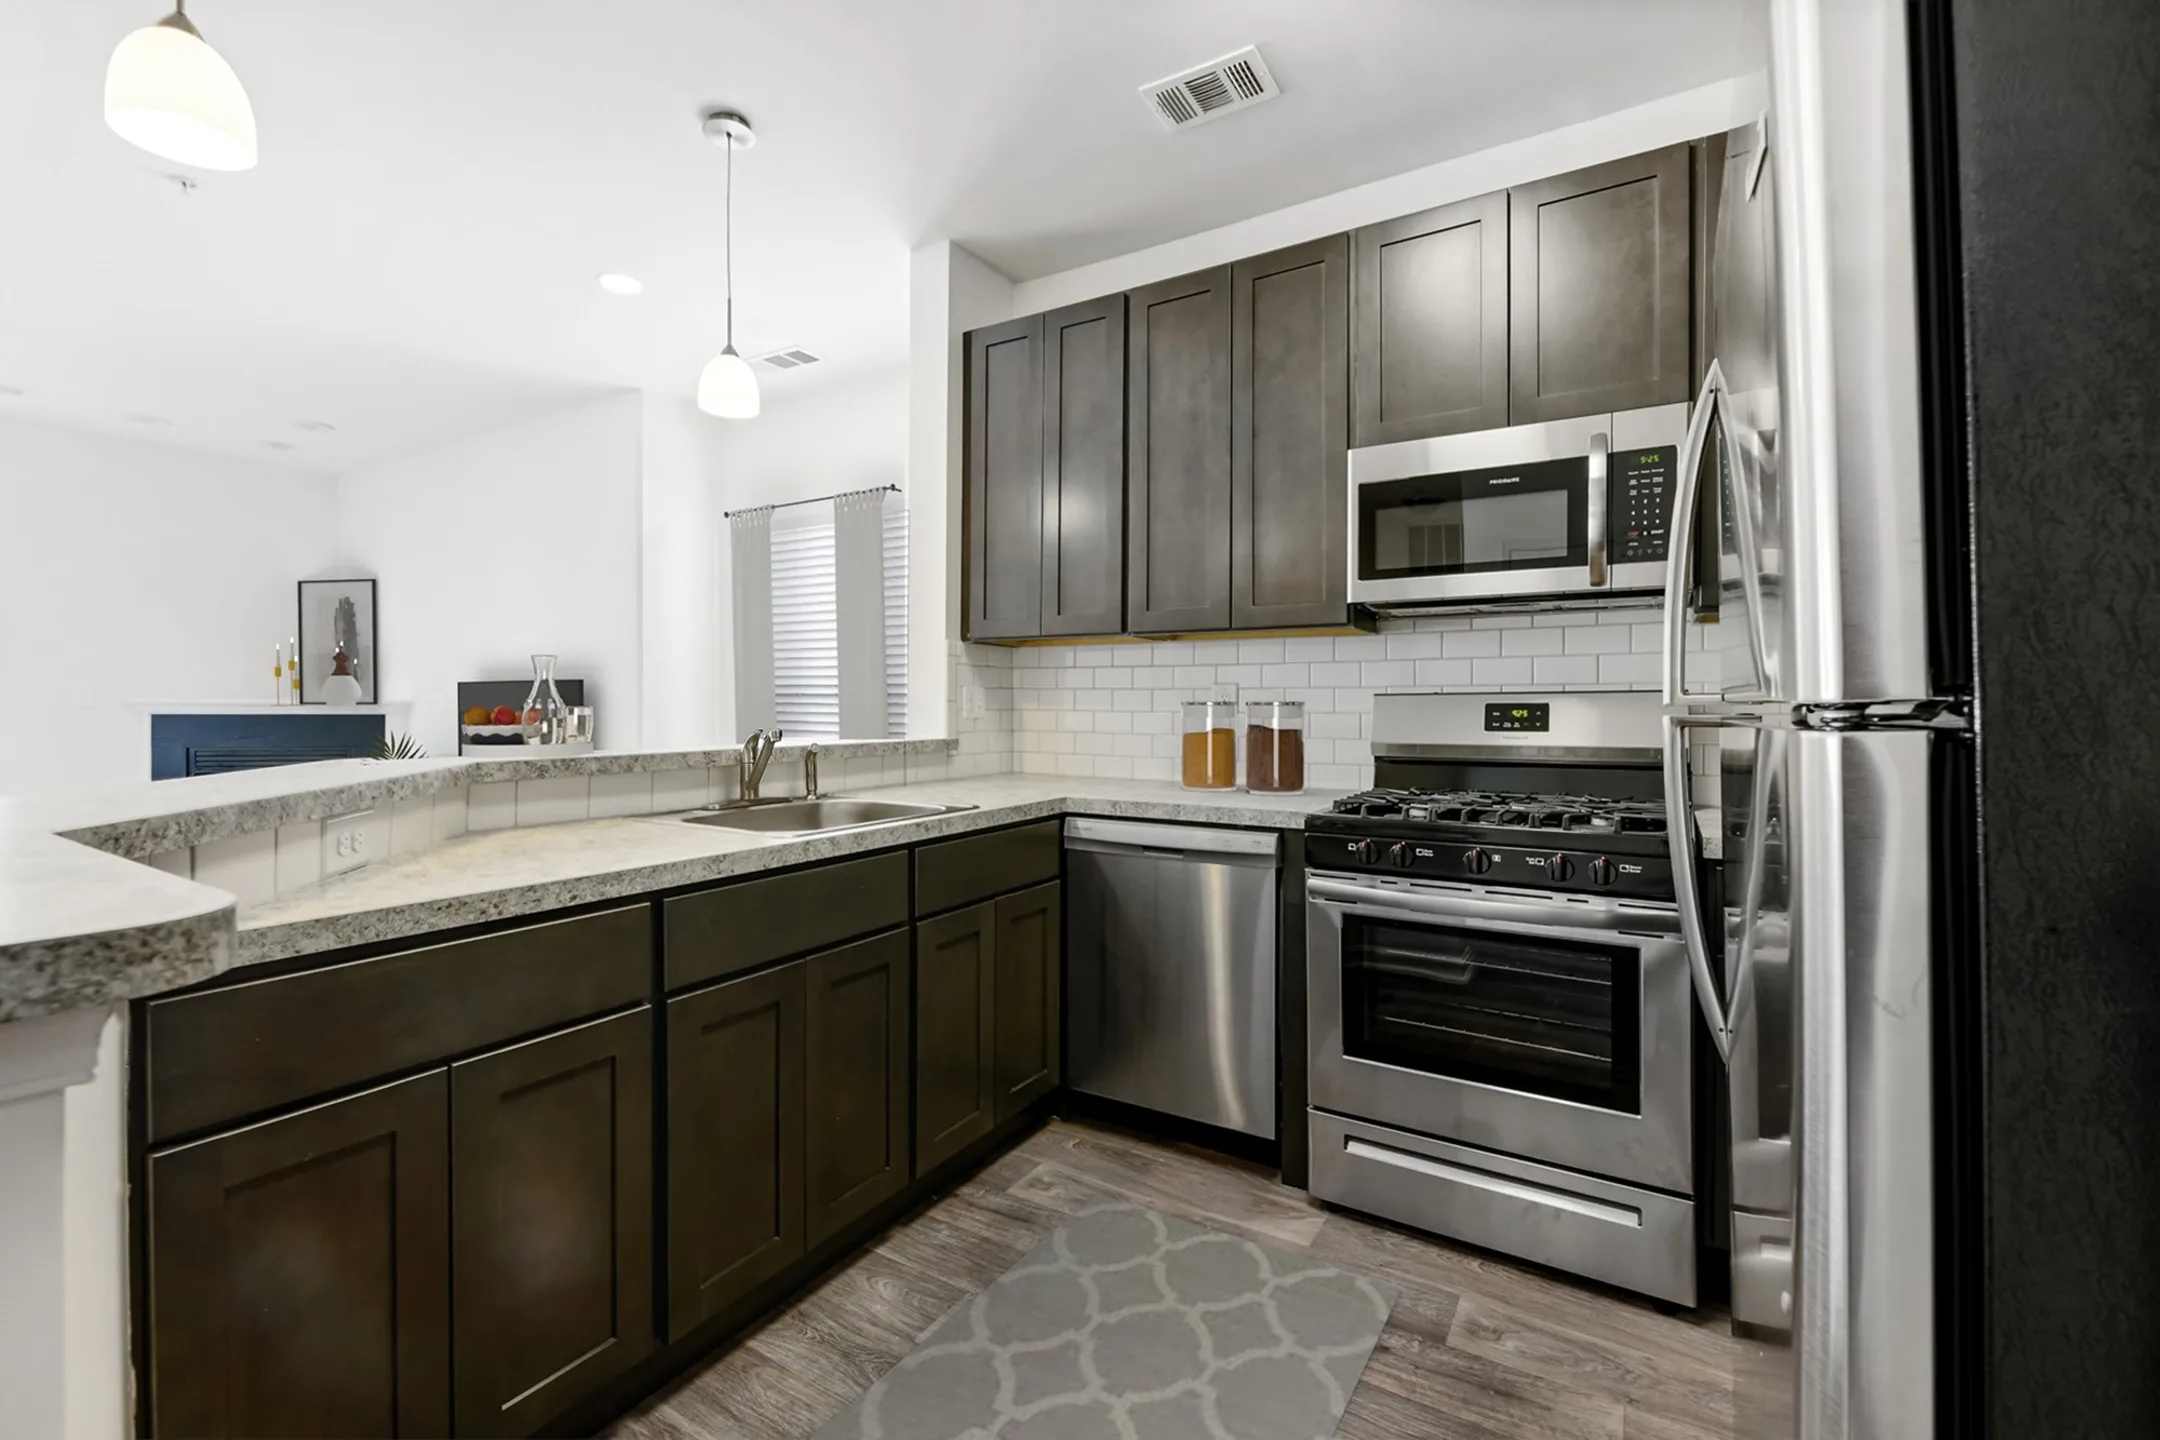 Kitchen - The Apartments at Cambridge Court - Rosedale, MD